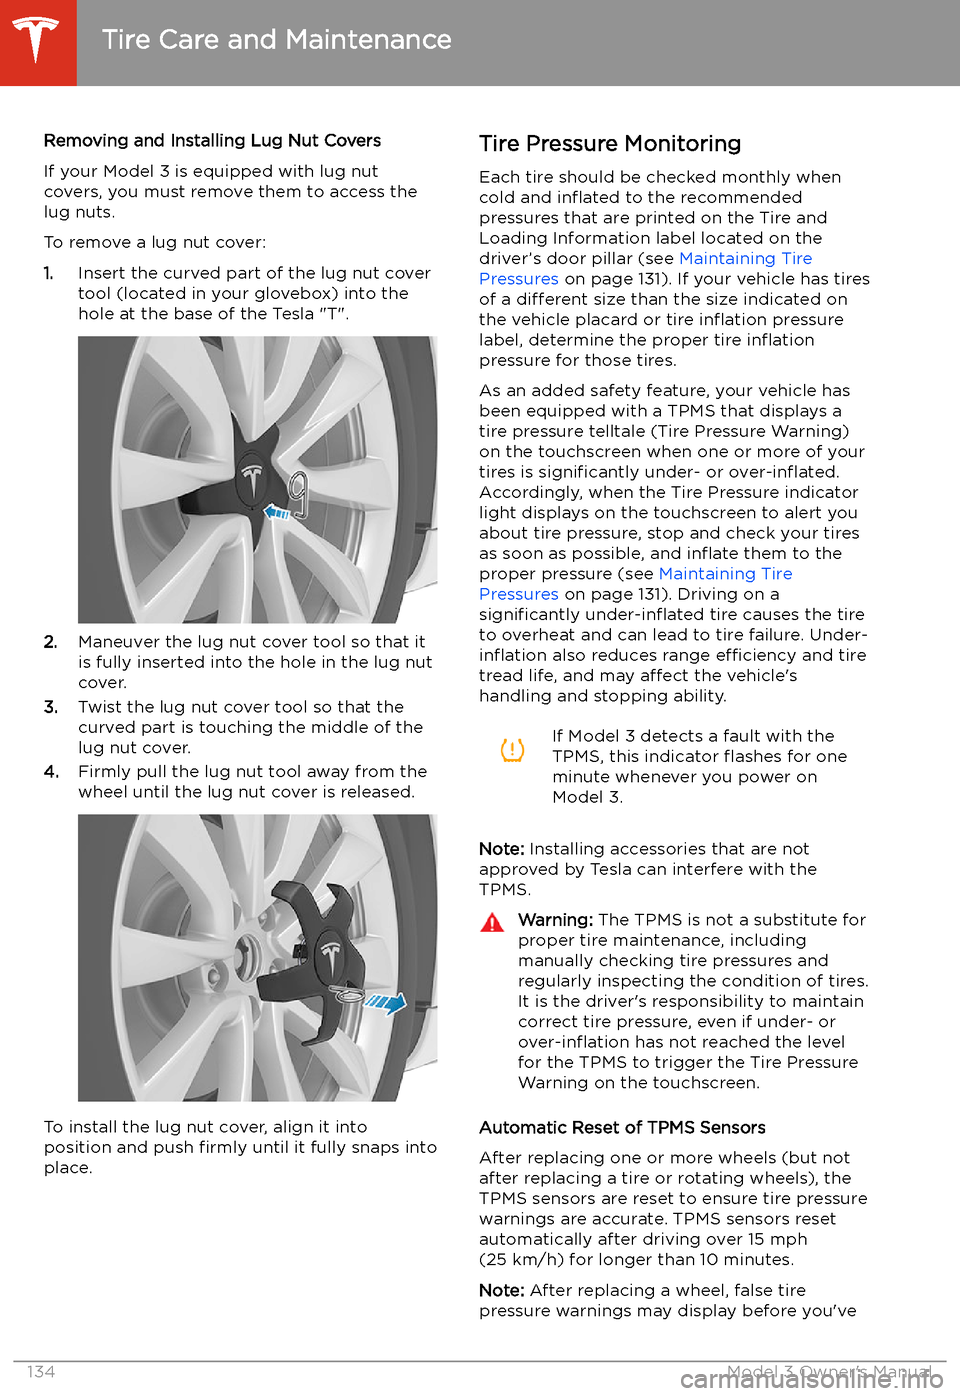 TESLA MODEL 3 2019  Owners Manual (Europe) Removing and Installing Lug Nut Covers
If your Model 3 is equipped with lug nut covers, you must remove them to access the
lug nuts.
To remove a lug nut cover:
1. Insert the curved part of the lug nut